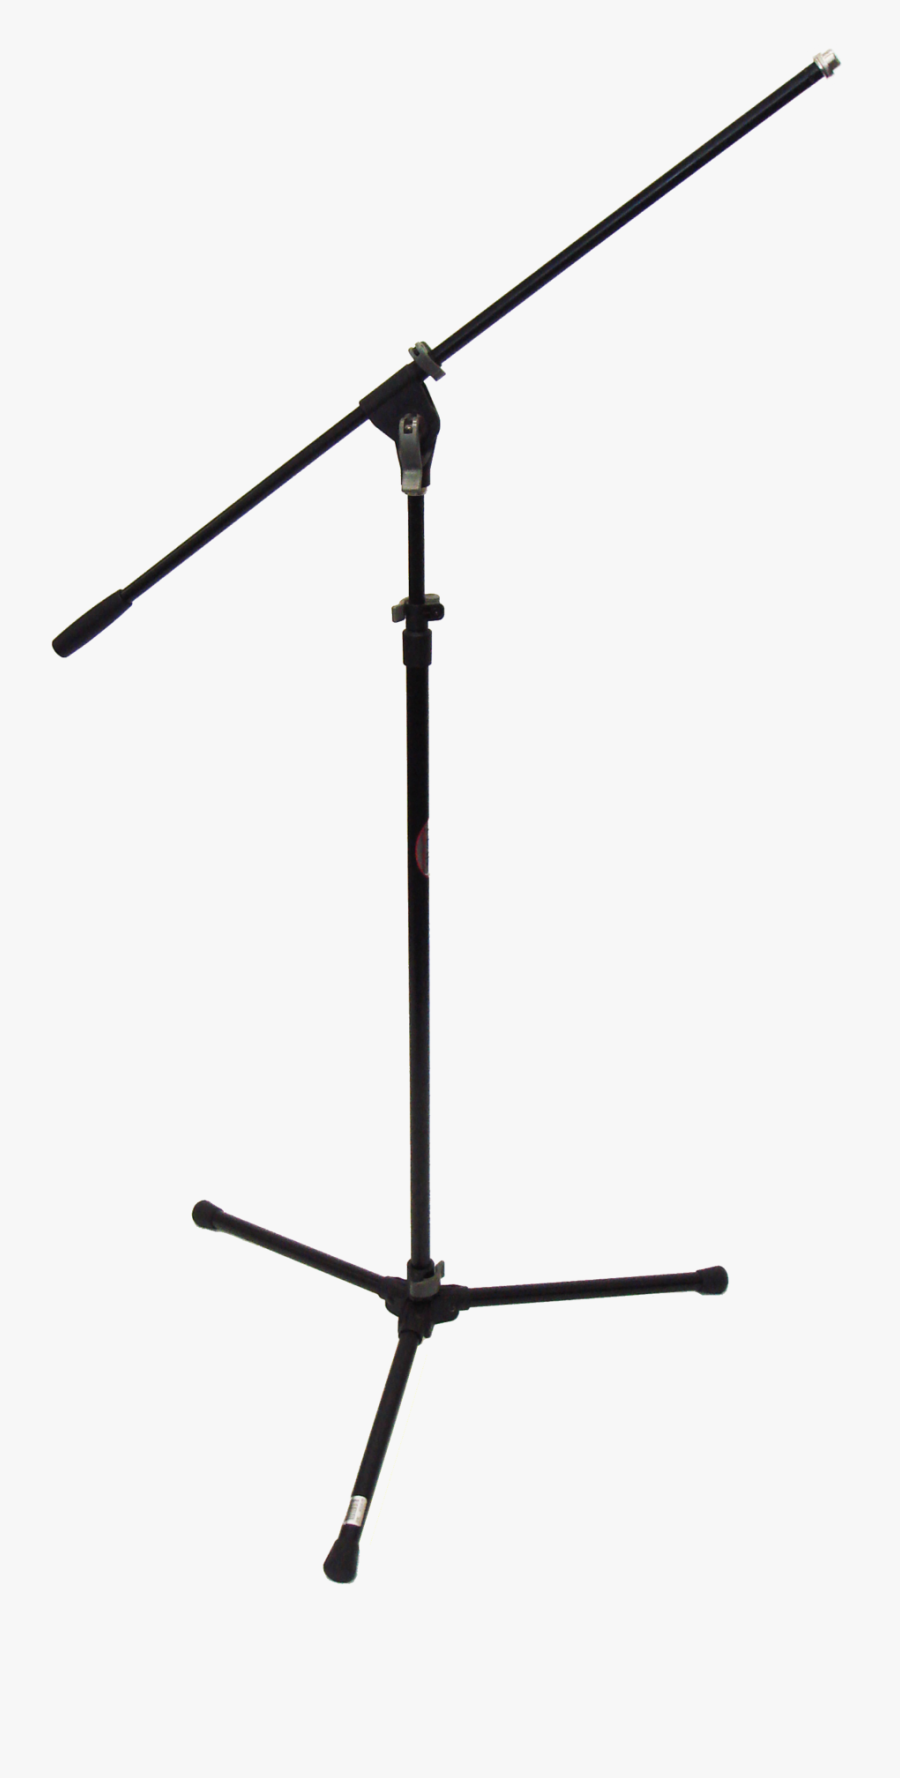 Microphone Stand Png - Microphone Stand Transparent Background, Transparent Clipart